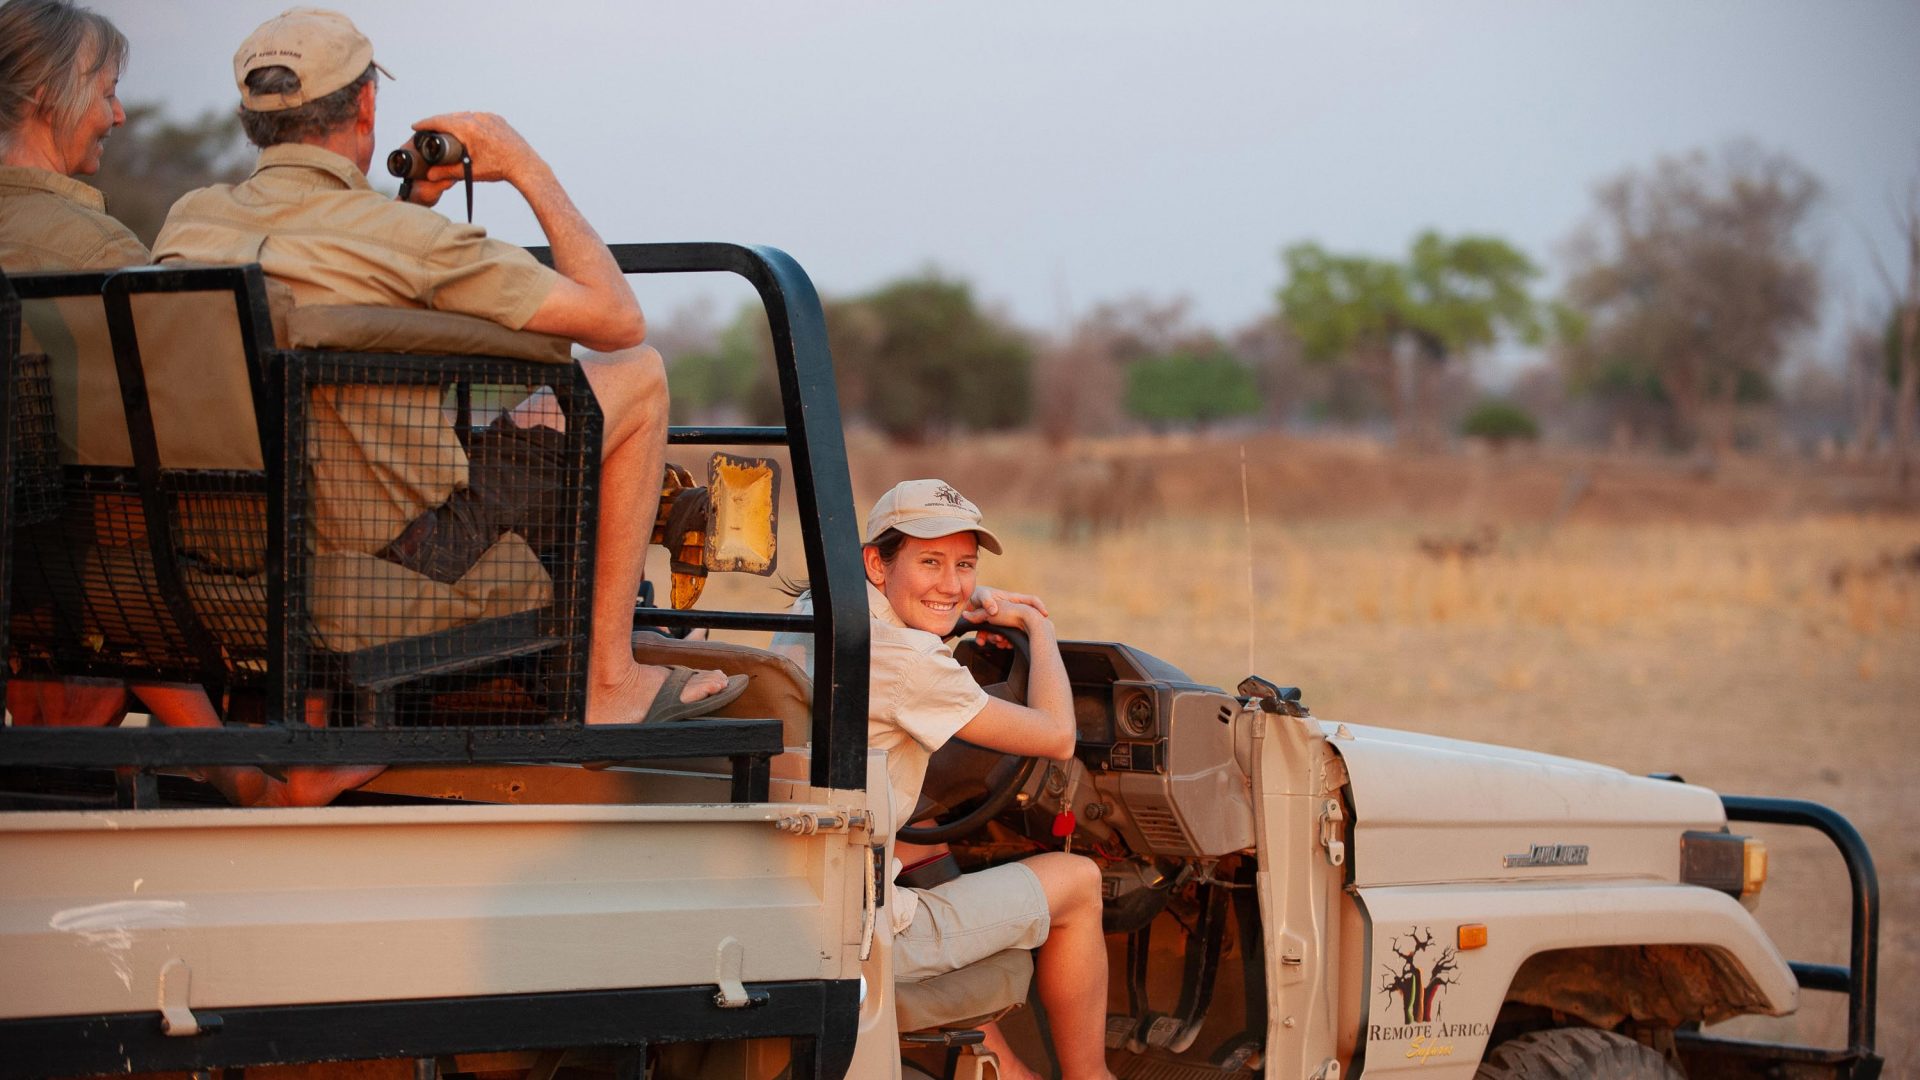 What’s it really like to be a female safari guide?